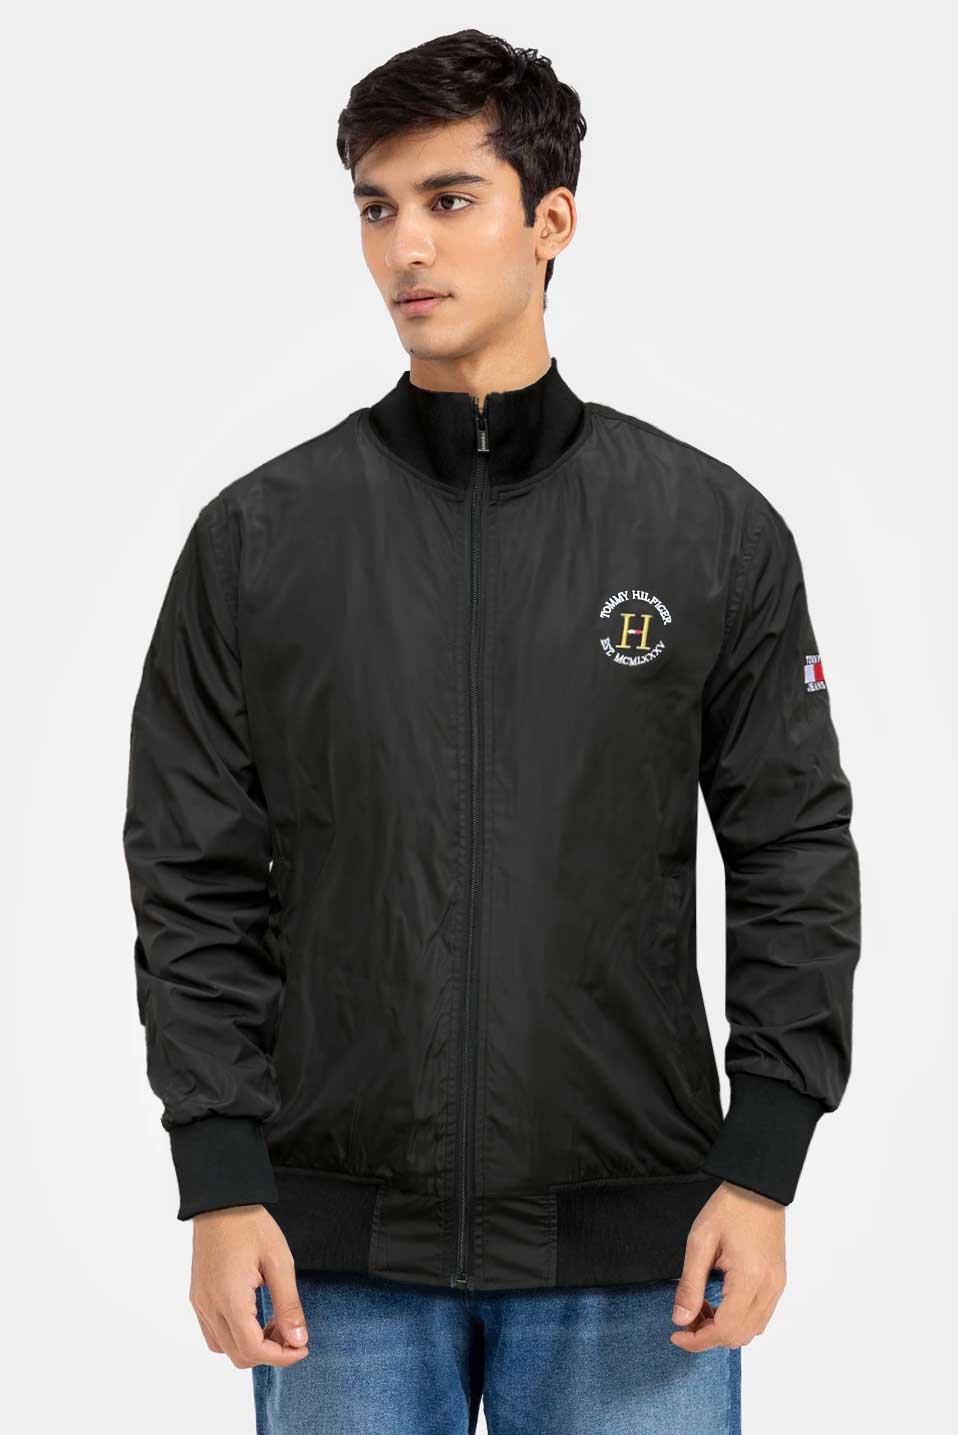 Branded Jackets-0122394